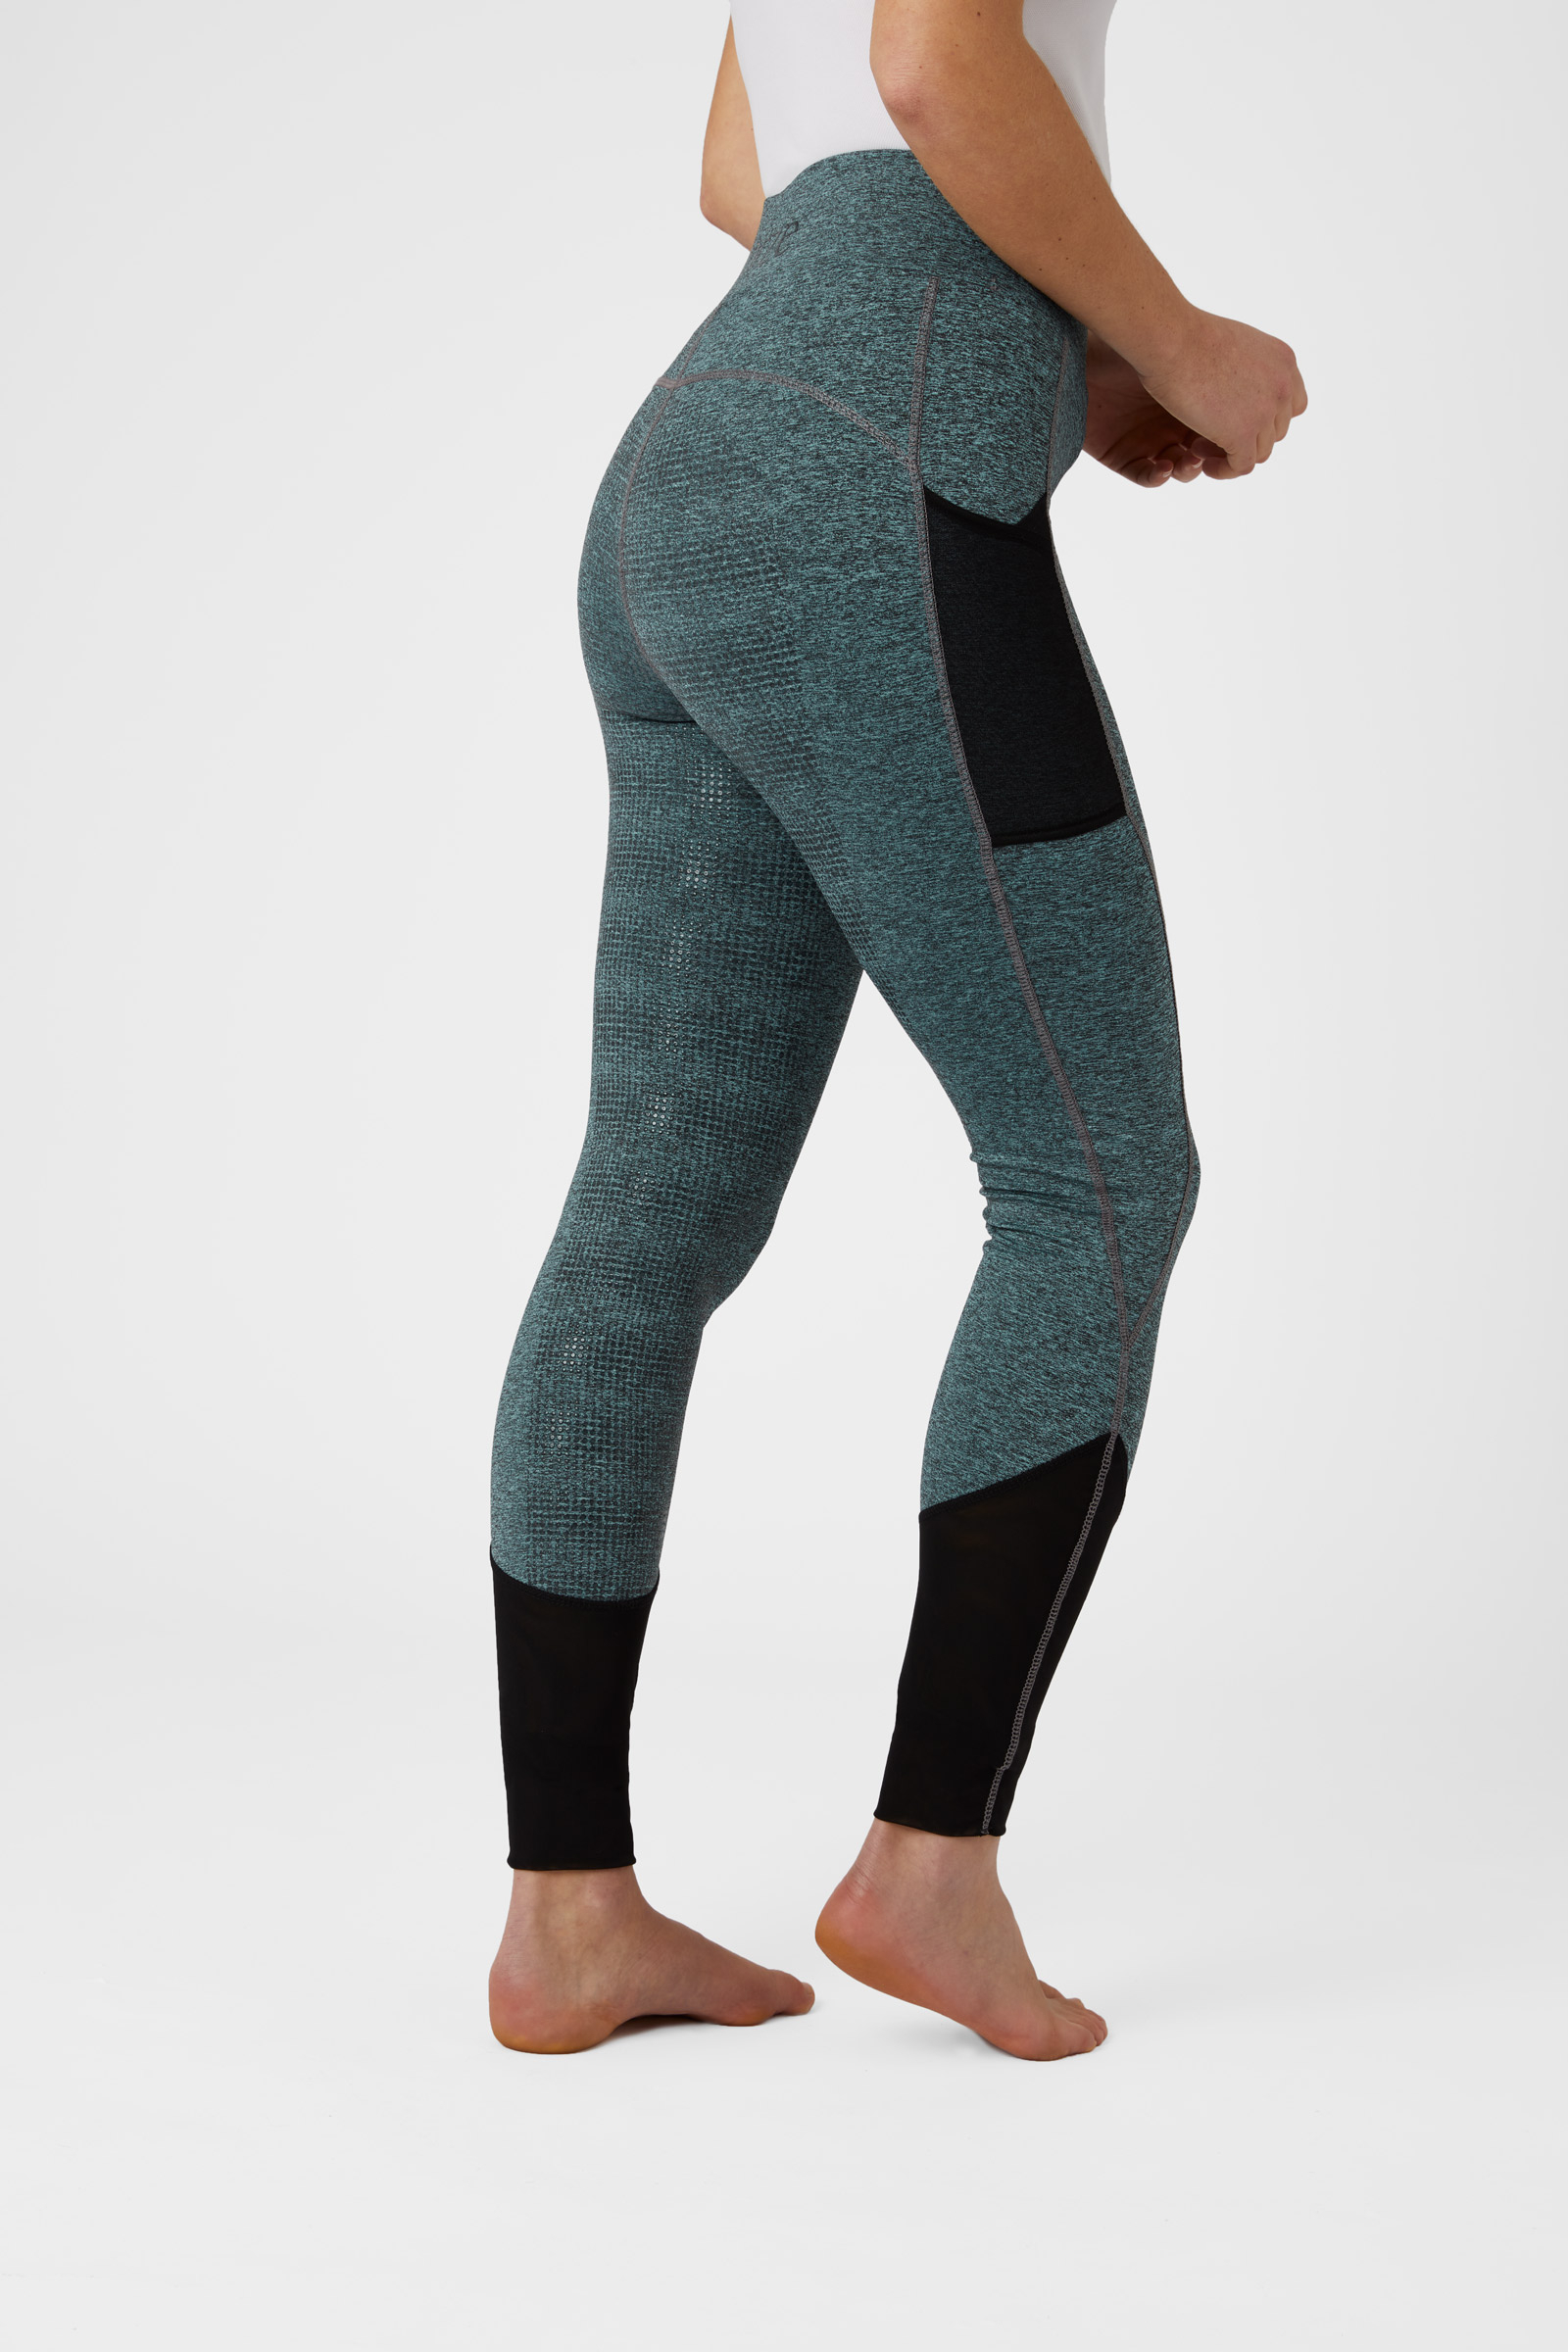 Horze Radiance Full Seat Tights - SALE